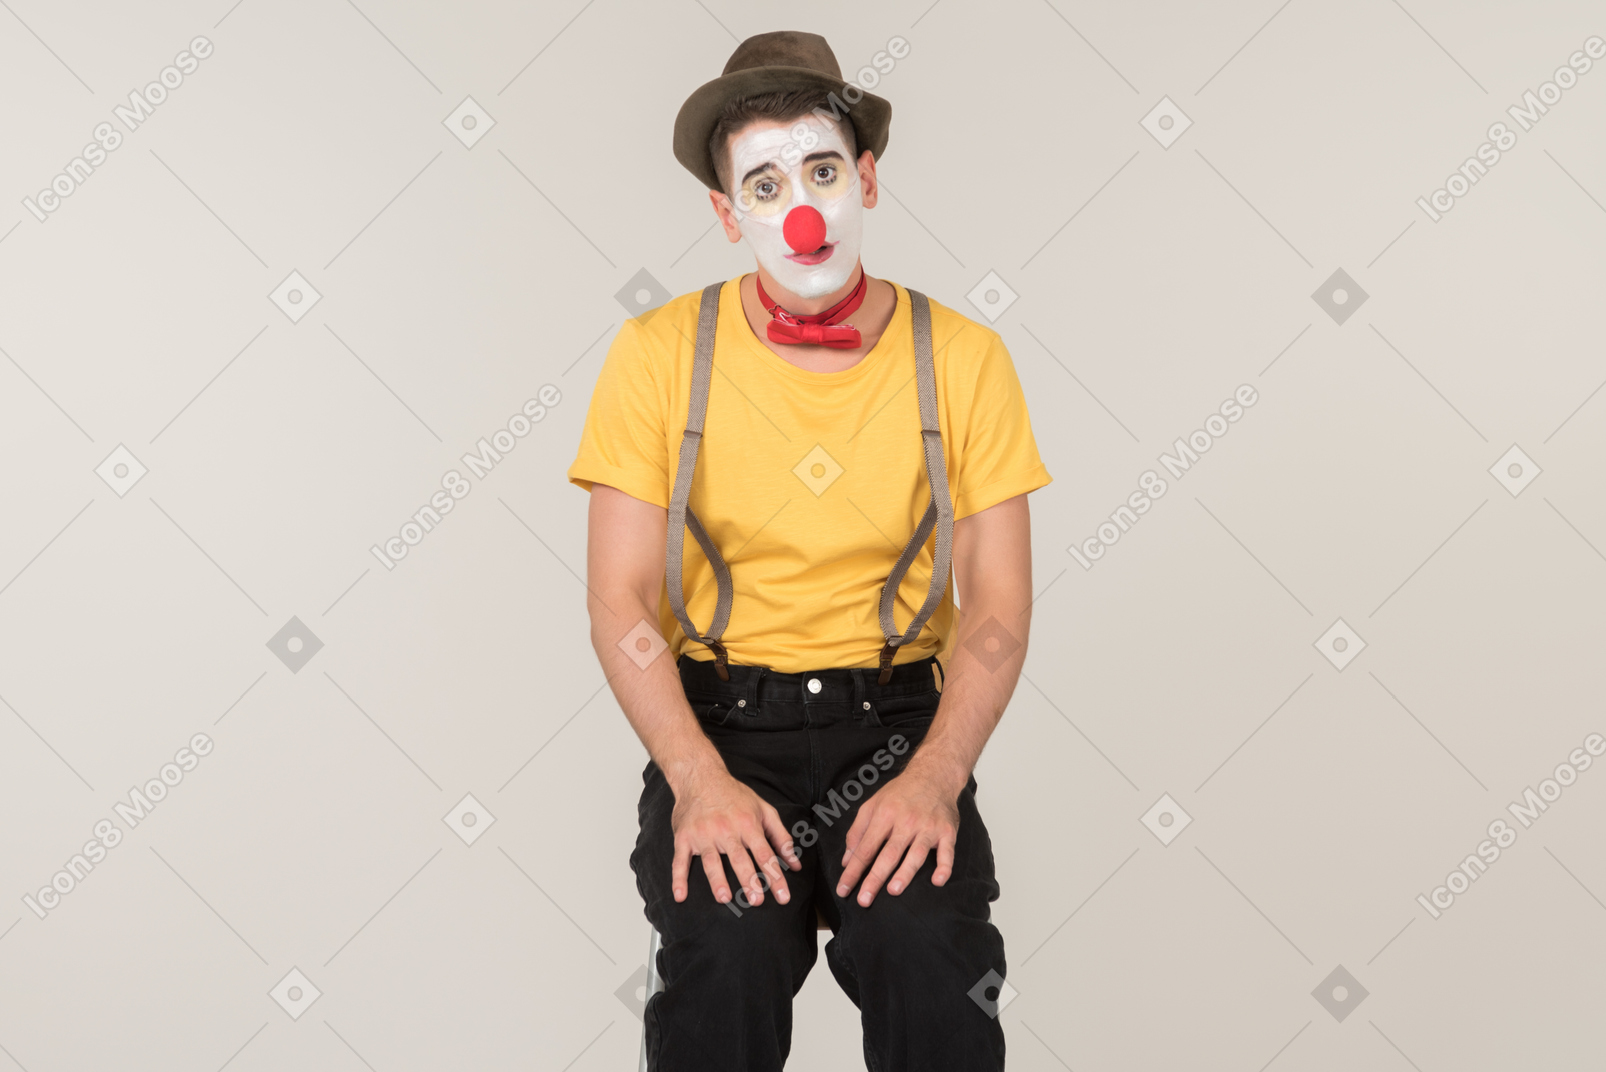 Clowns can be in a very sad mood too, you know